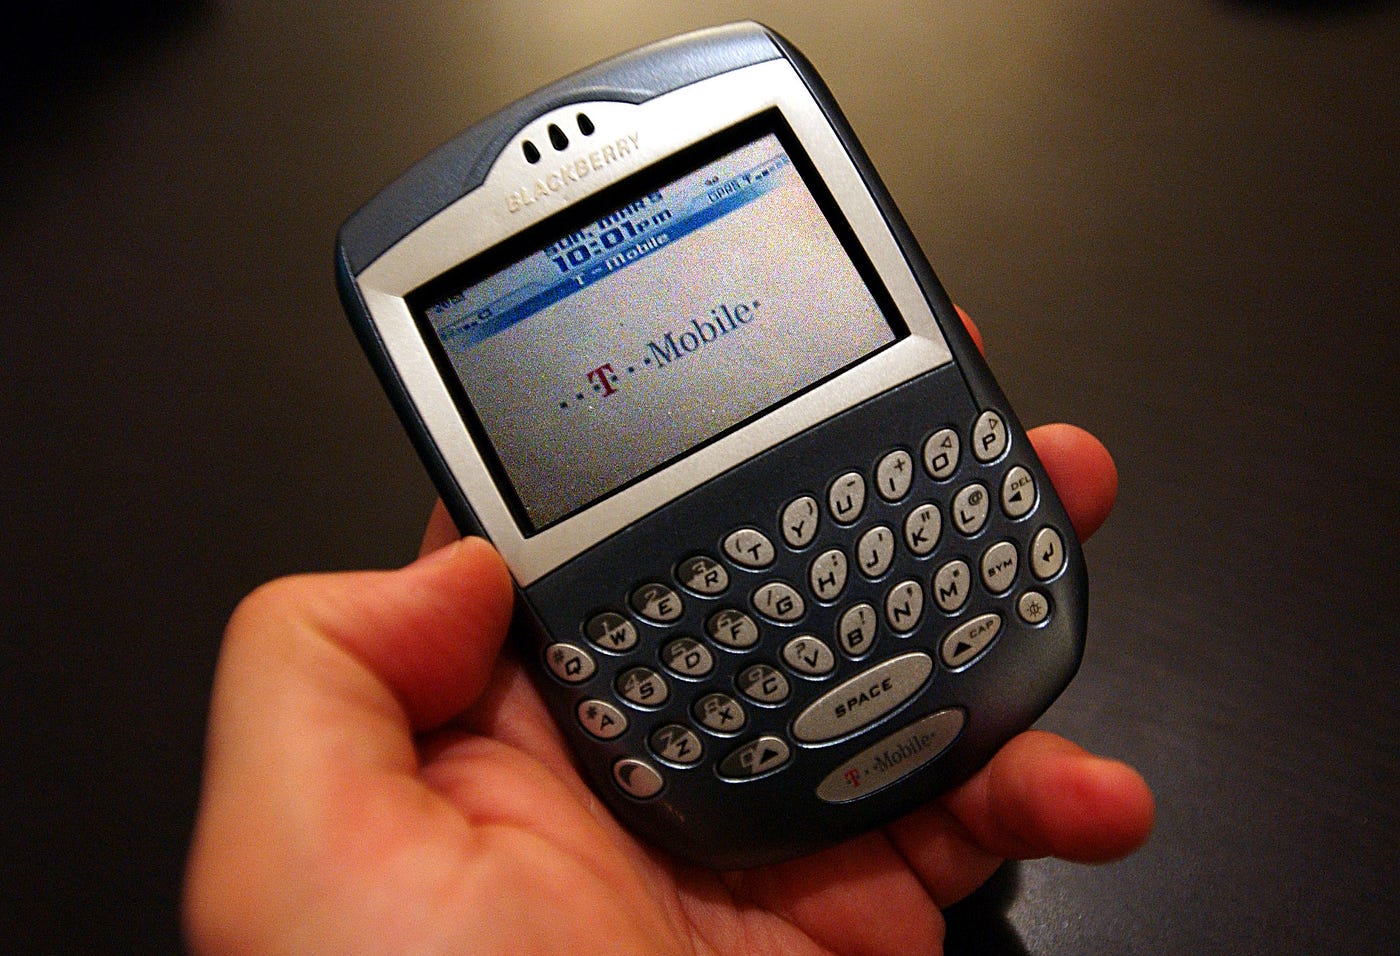 The Original BlackBerry Was Ahead of Its Time, by Tareq Ismail